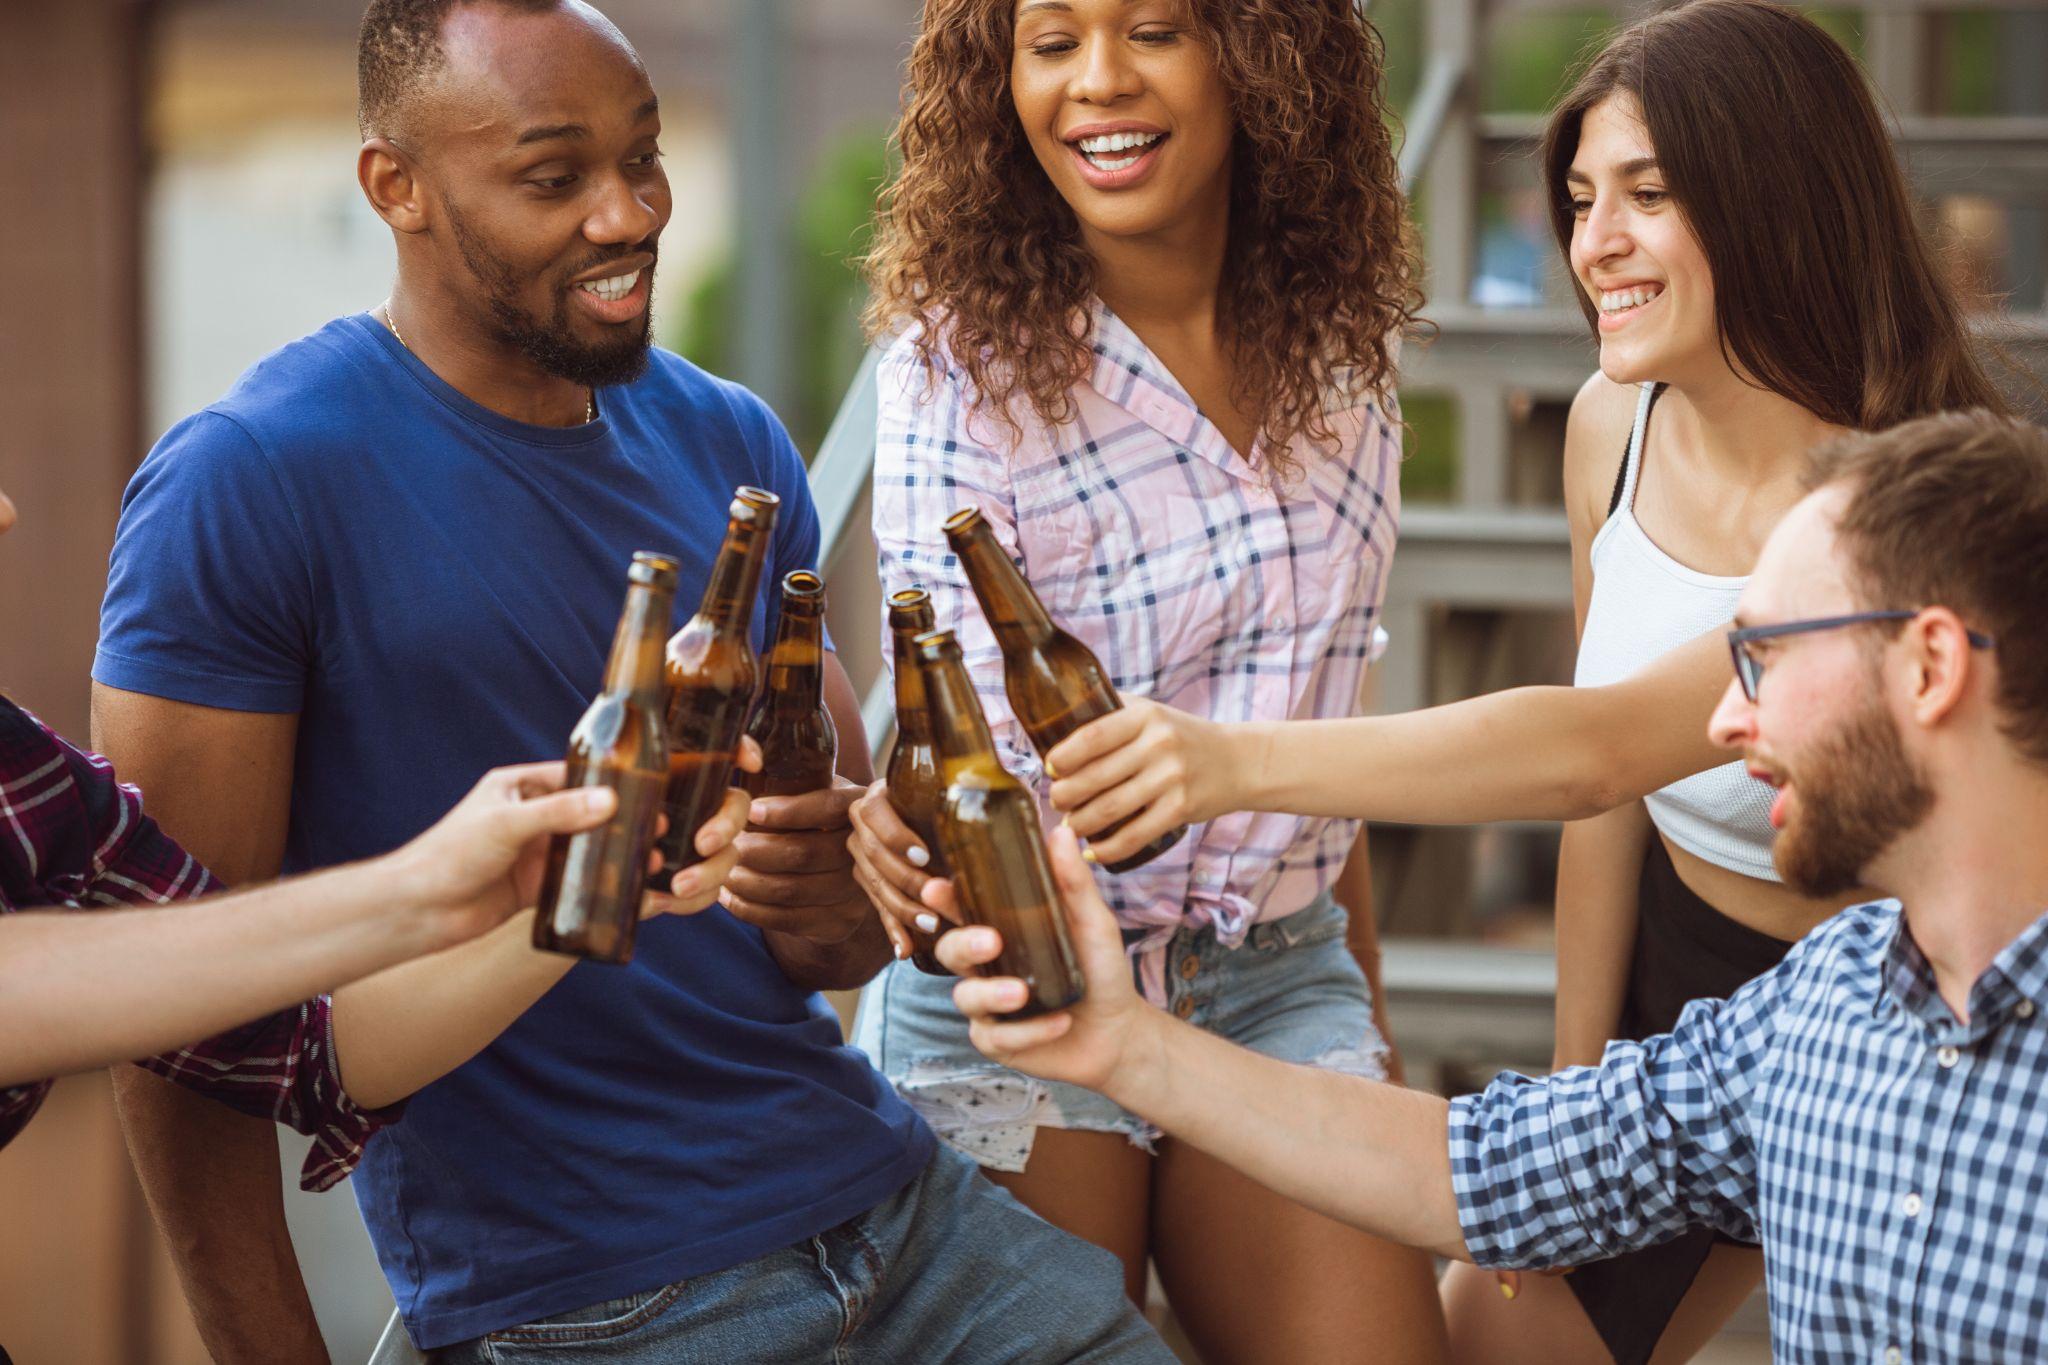 alcohol use in college students